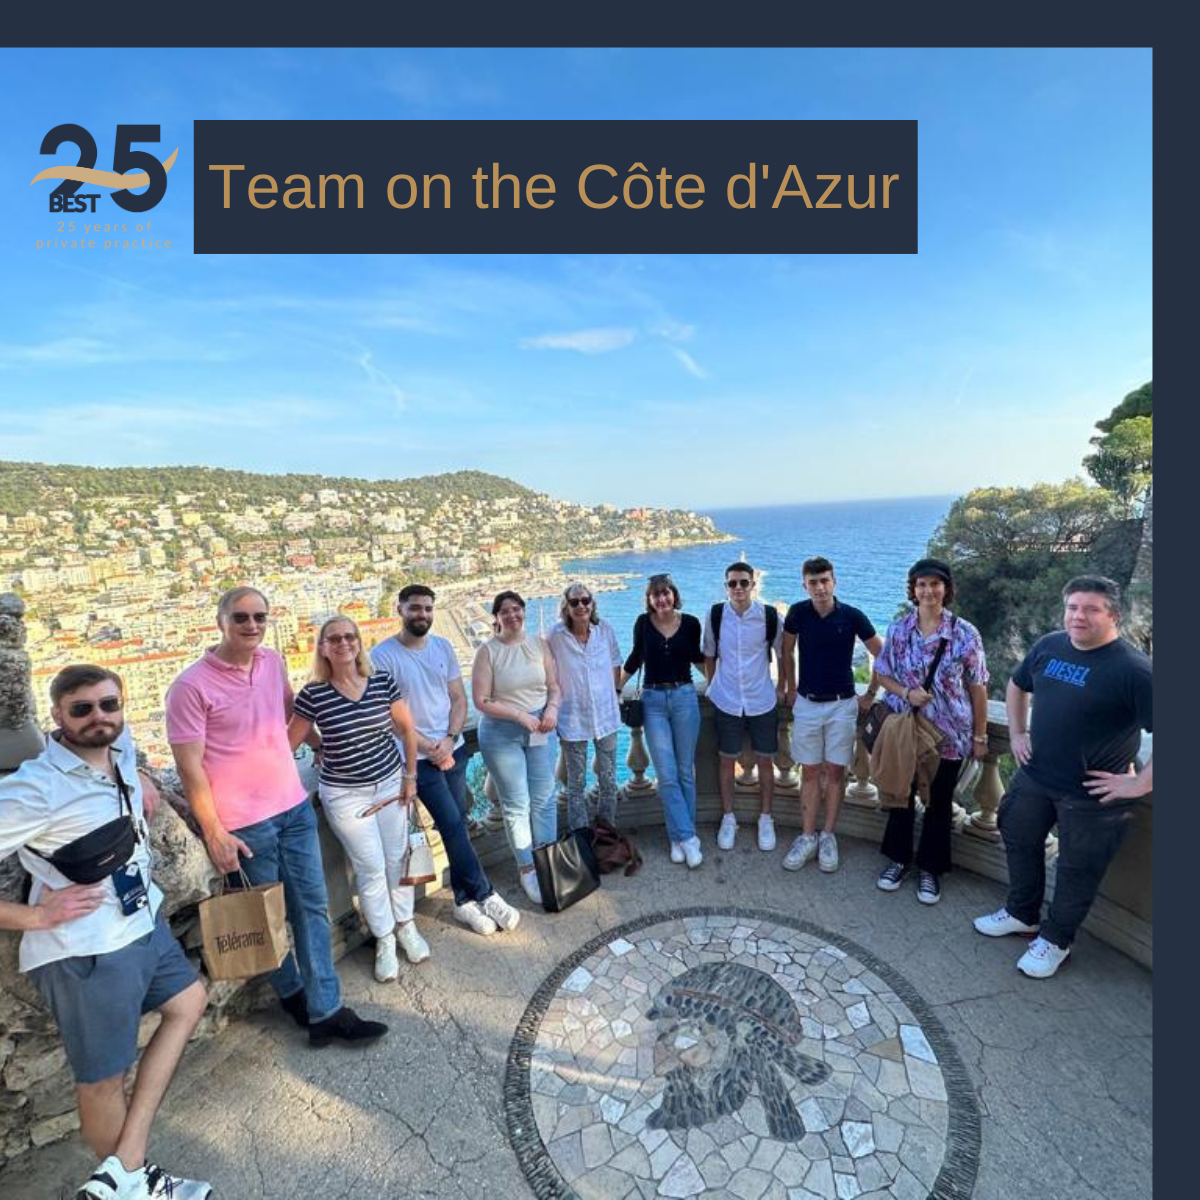 Dr. Michael Best and Team celebrate on the Côte d’Azur